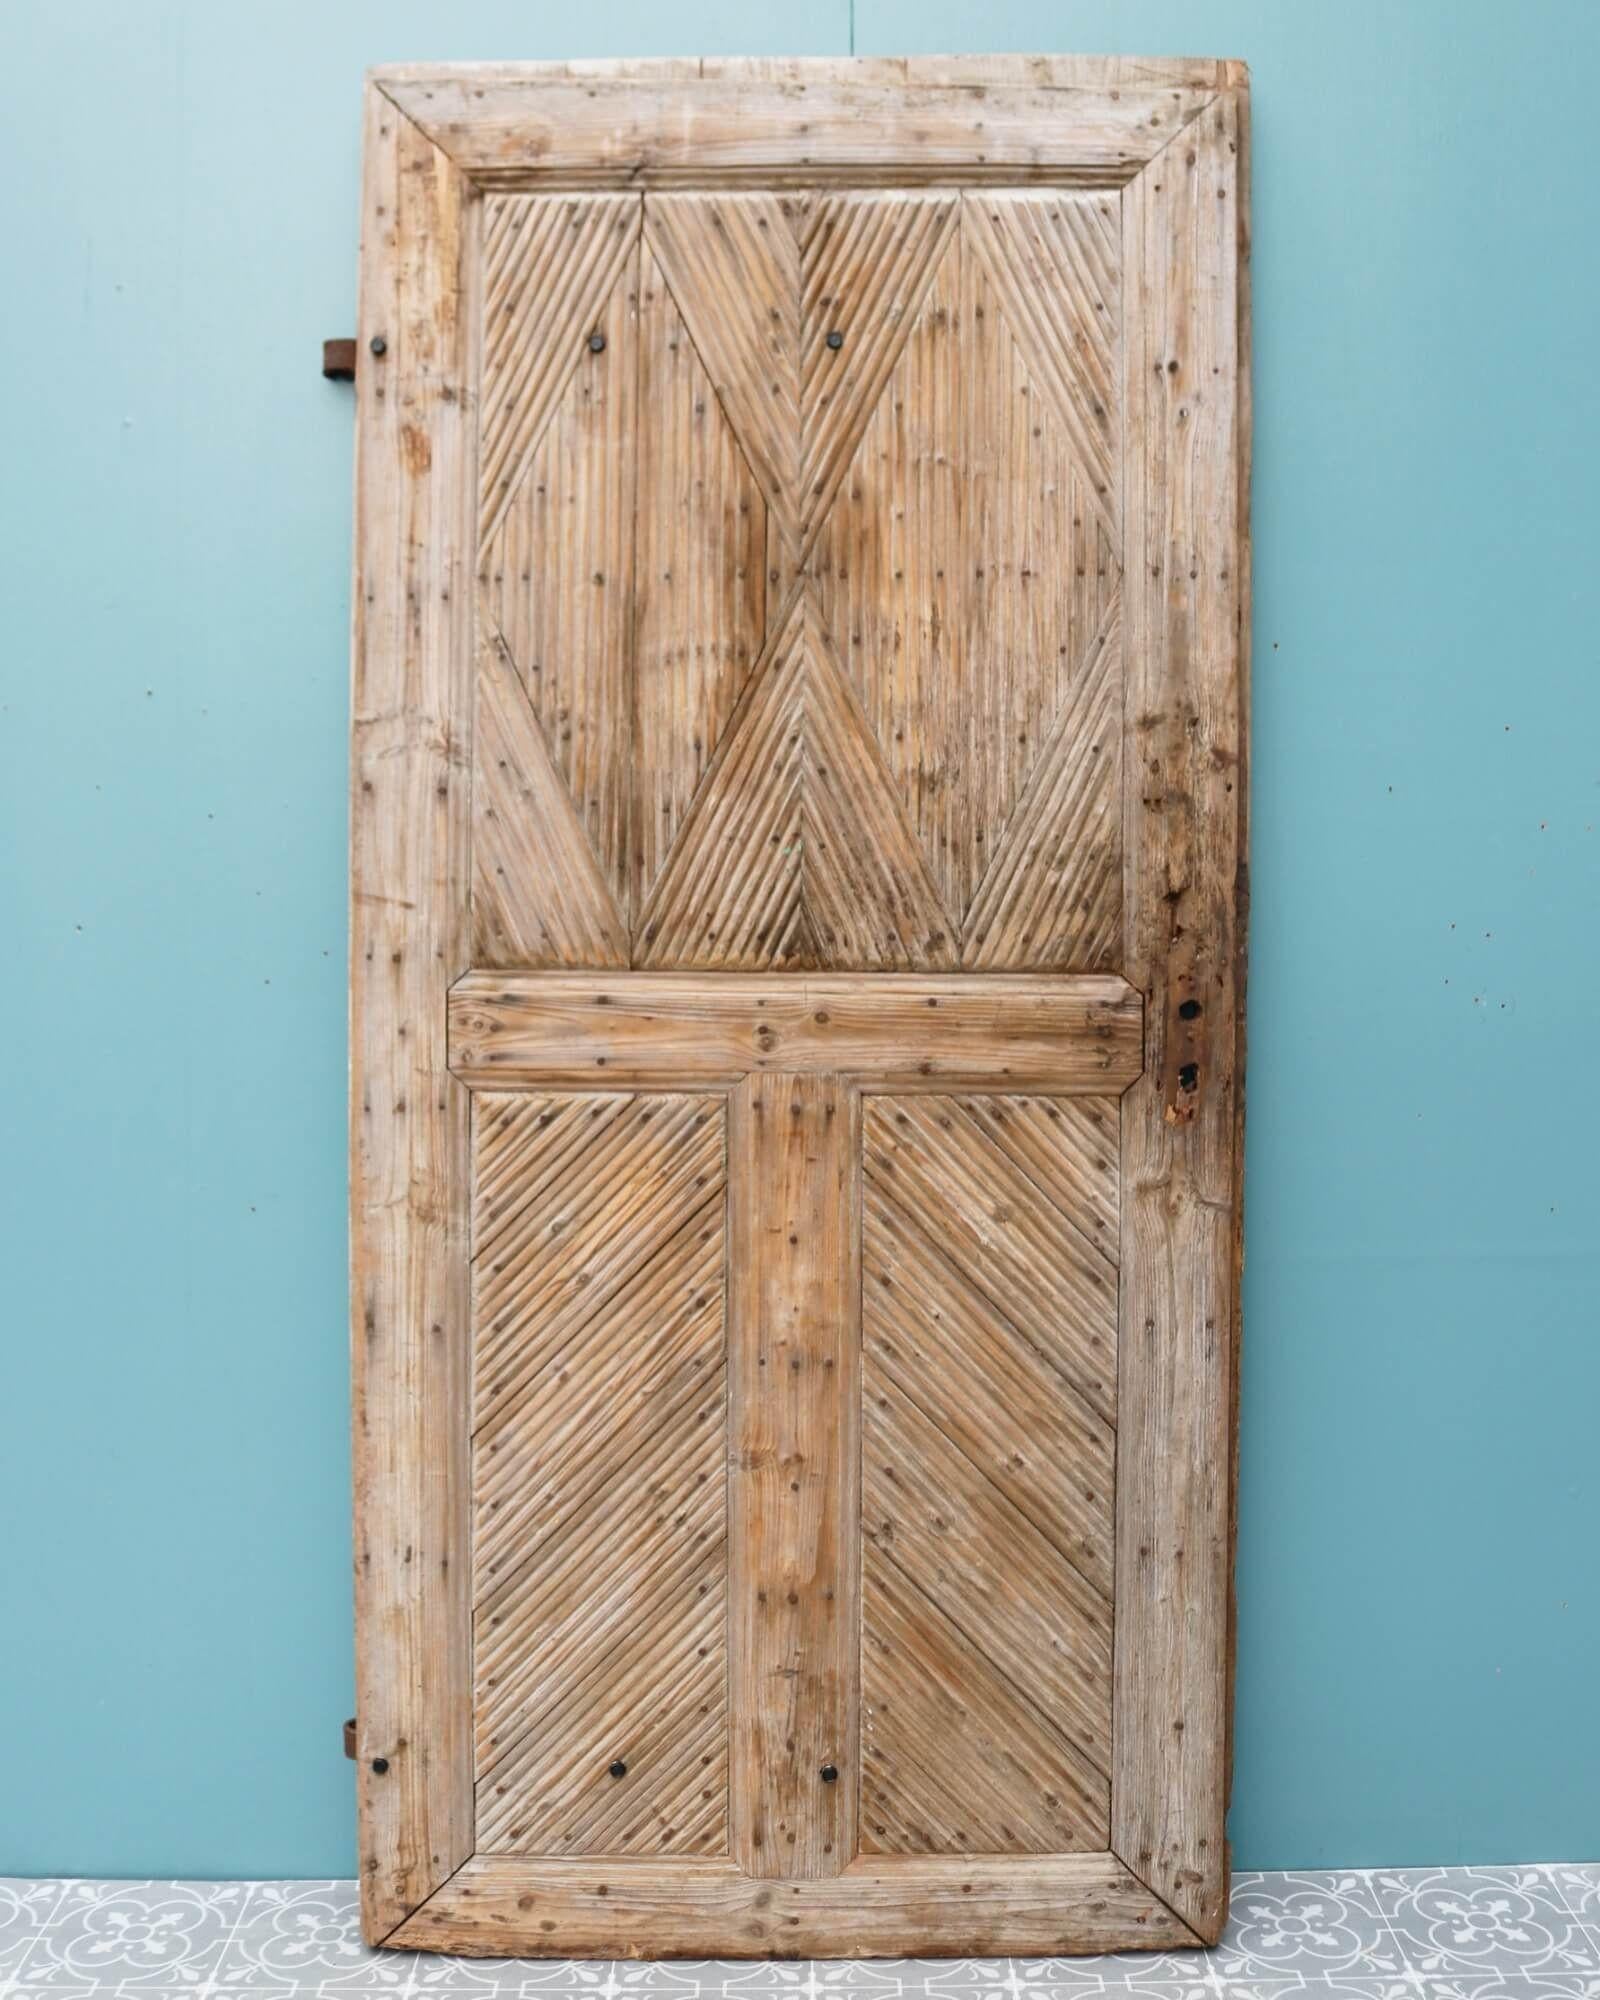 An unusual reclaimed exterior door originating from France, circa 1800. This beautiful antique exterior door makes a handsome entrance or side door to a country style cottage or rustic farmhouse. The door features three panels with an attractive